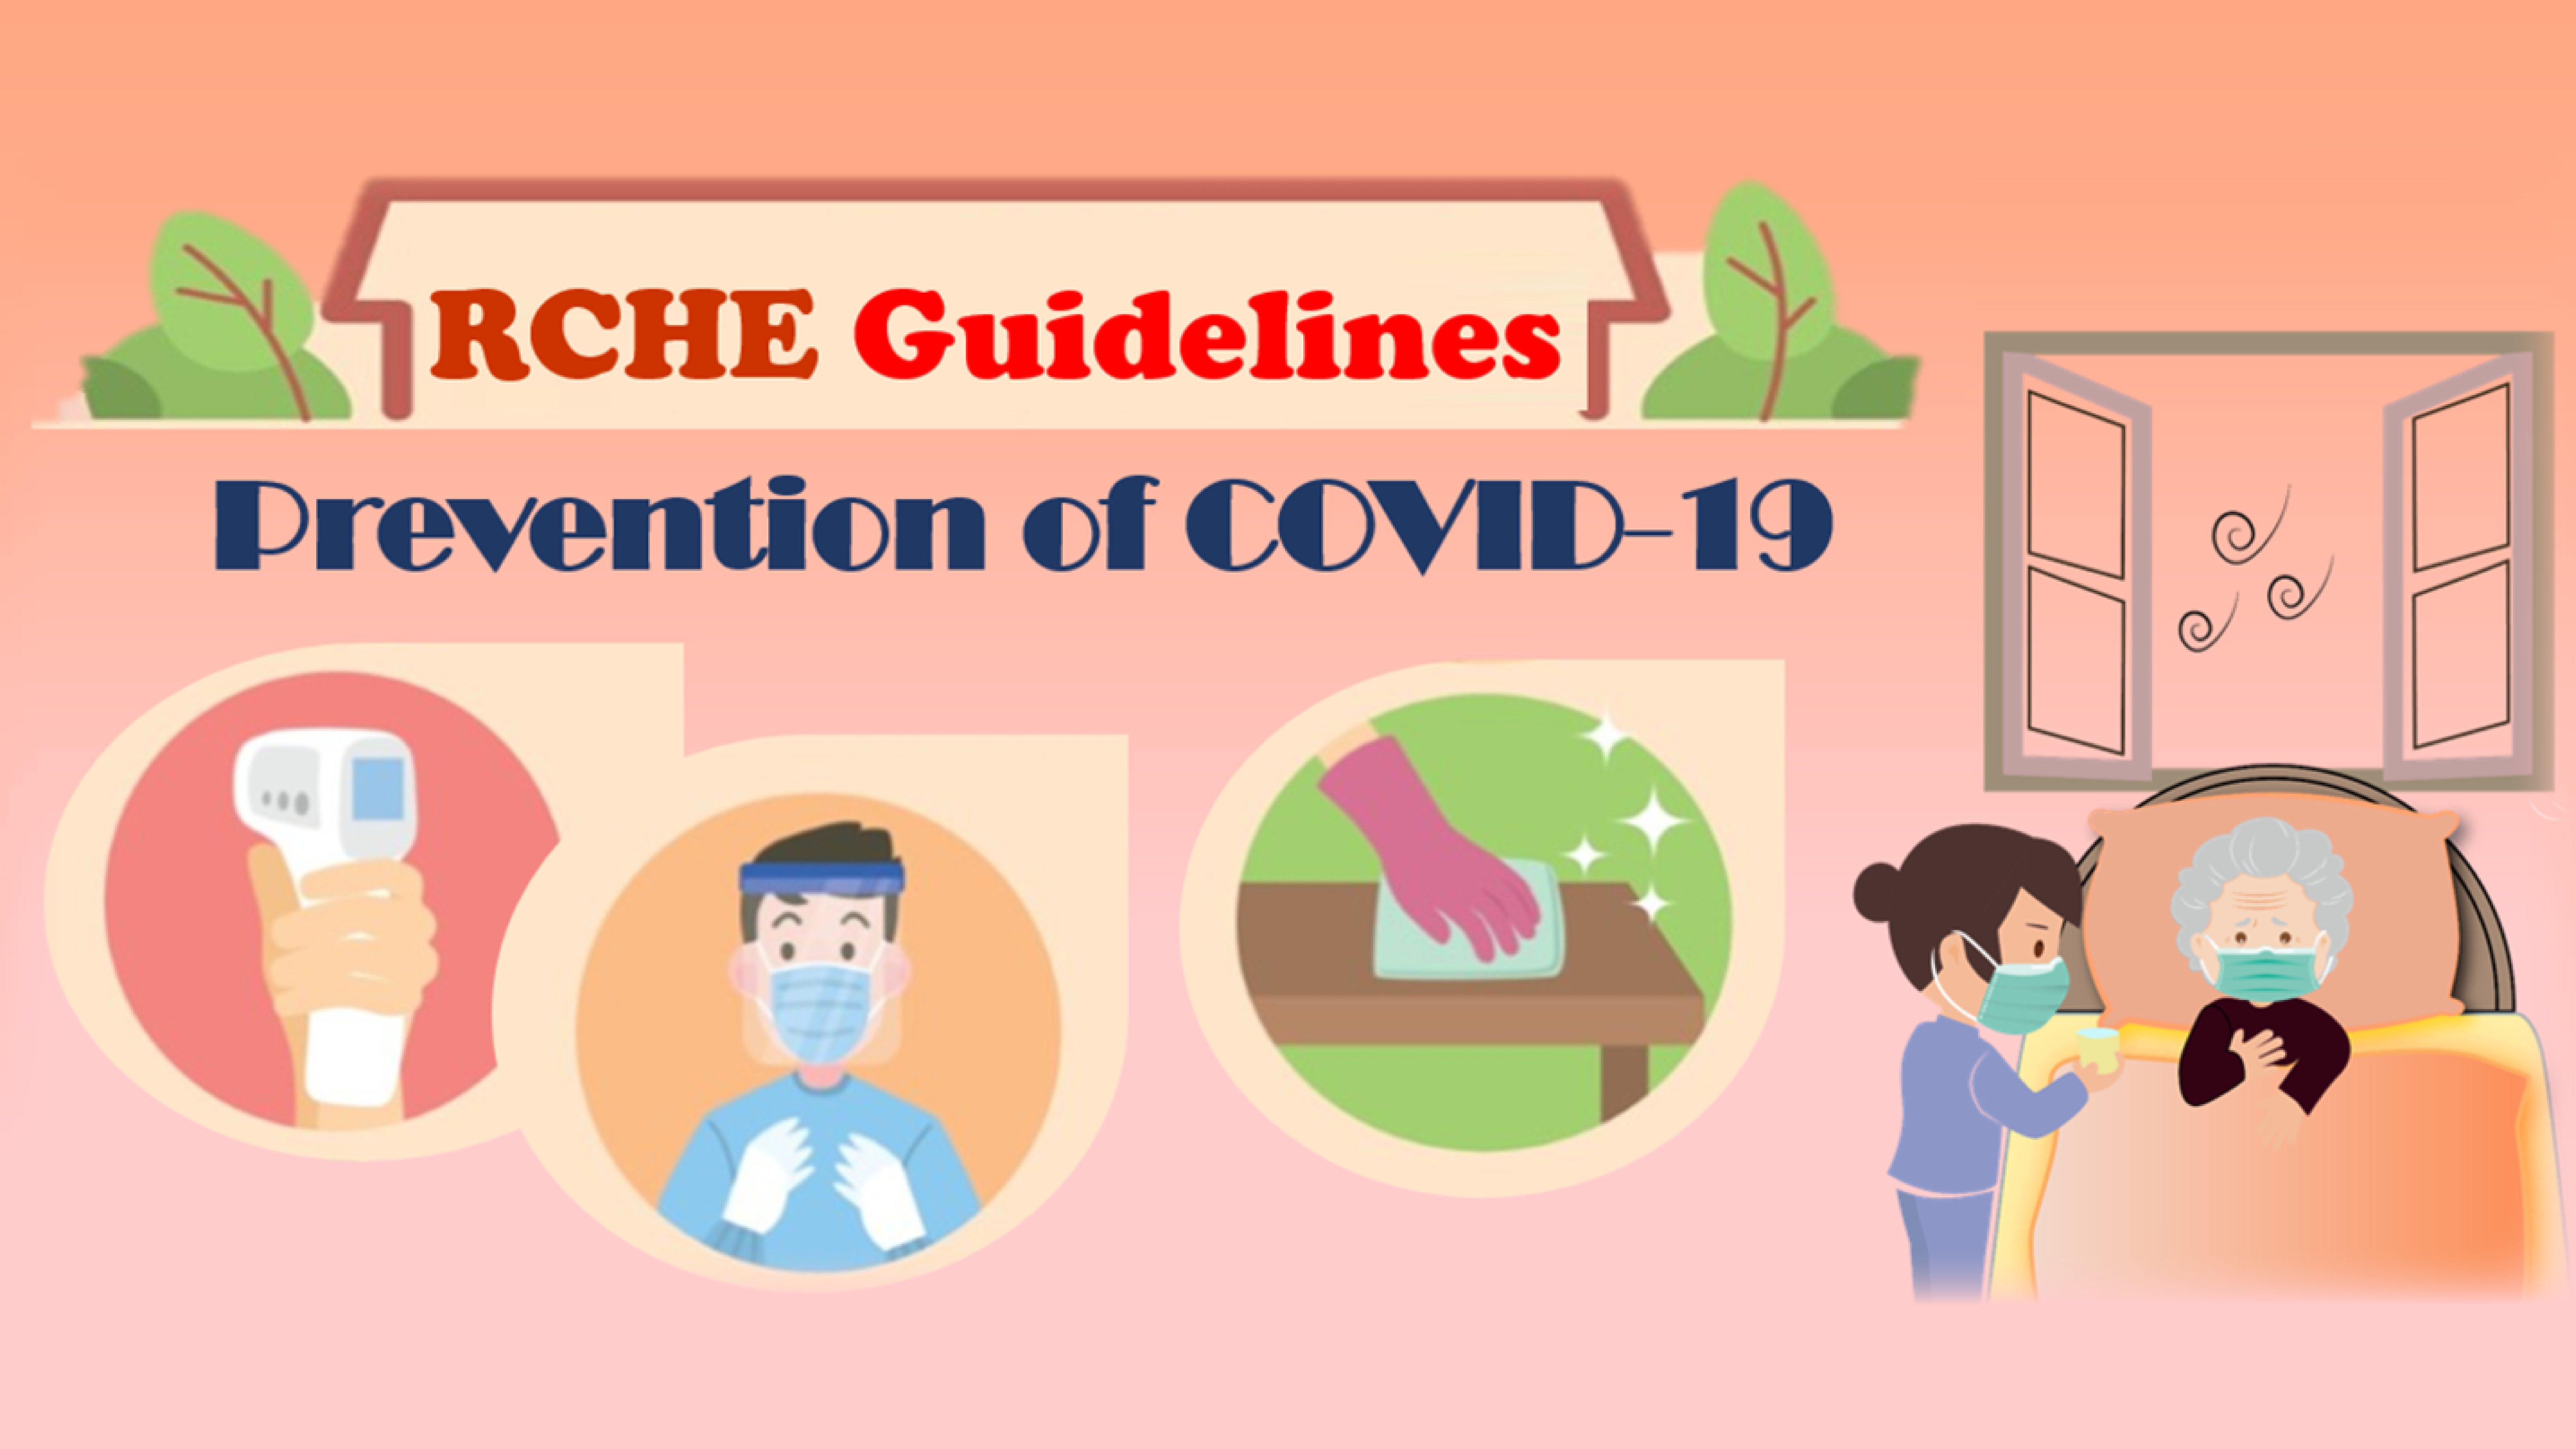 Guidelines for Residential Care Homes for the Elderly or Persons with Disabilities for the Prevention of Coronavirus disease (COVID-19) (Interim)